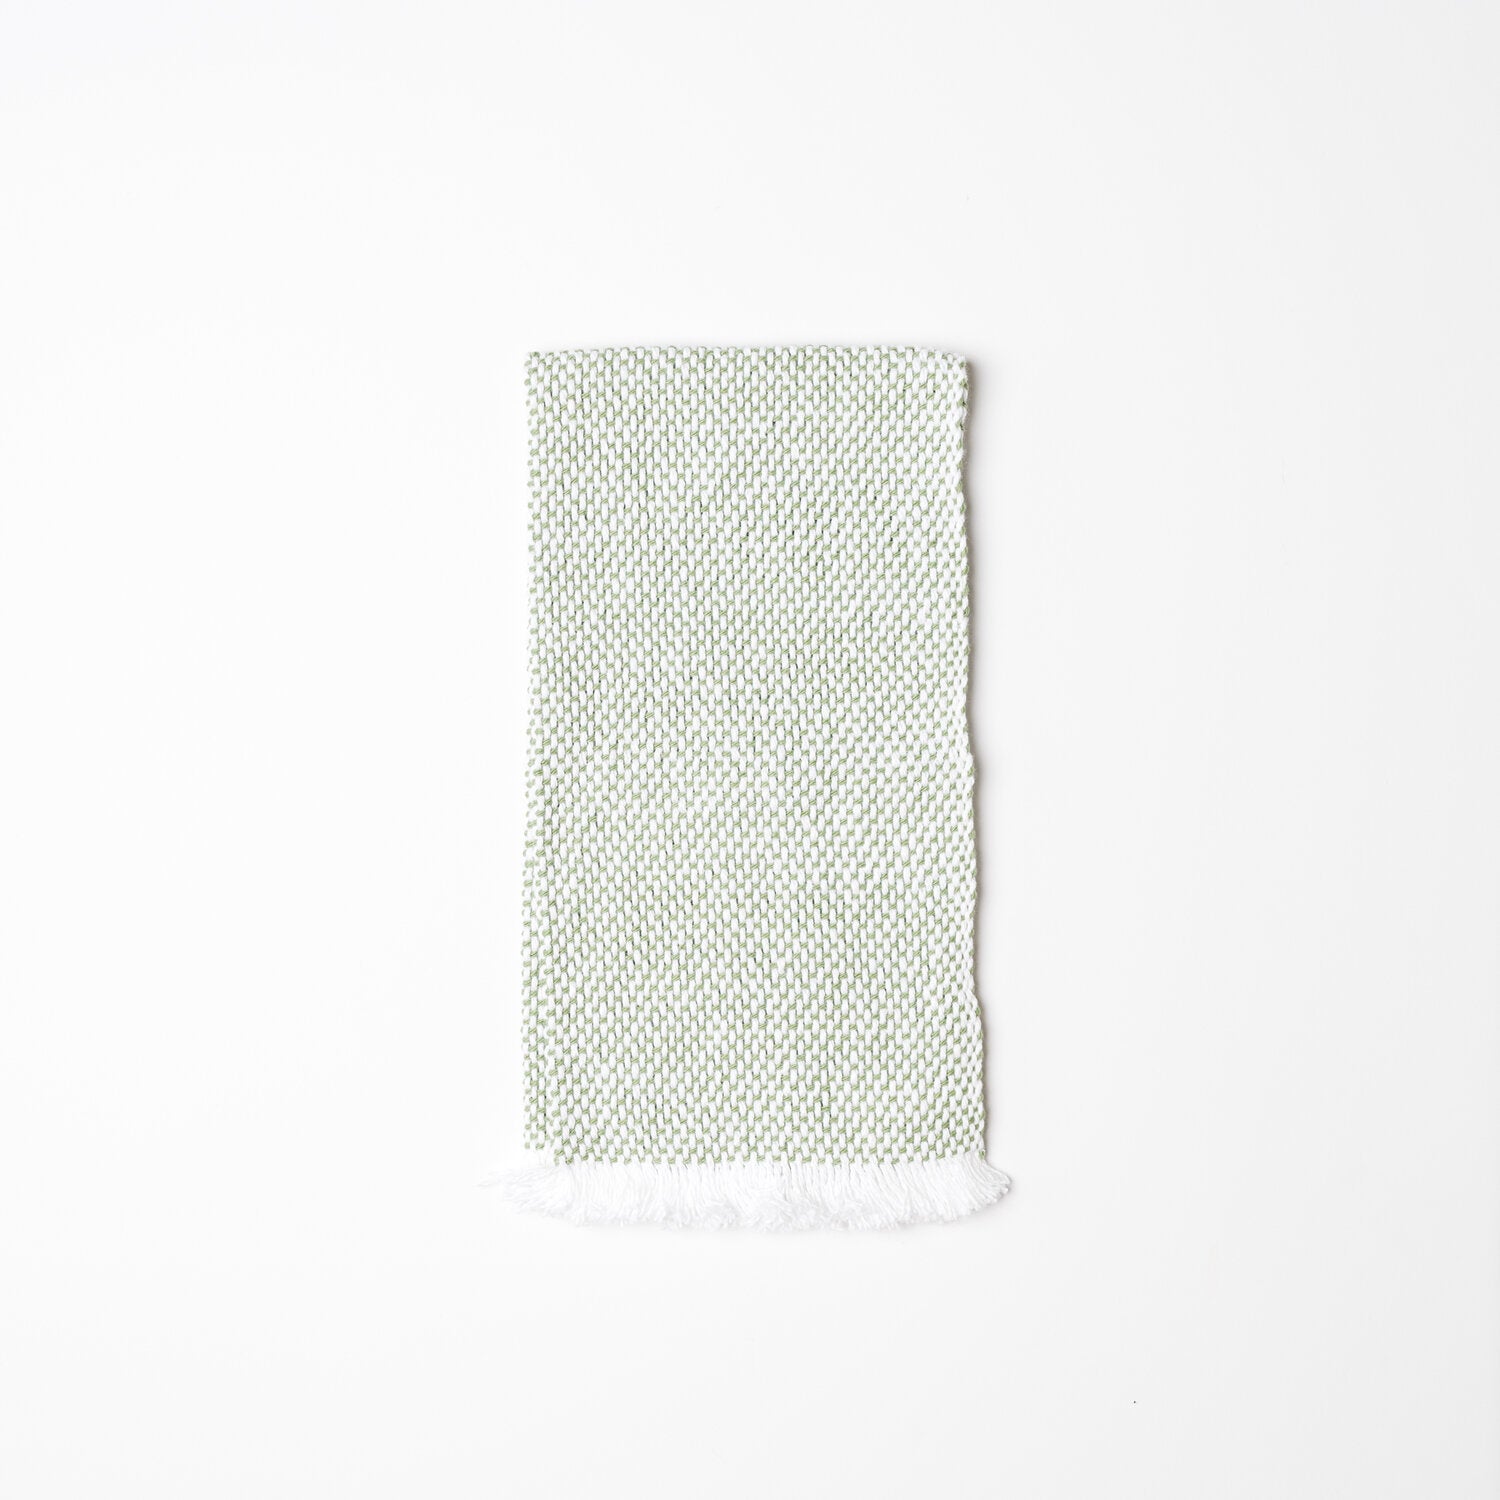 KD Weave Green + White Hand Towel, Set of 2